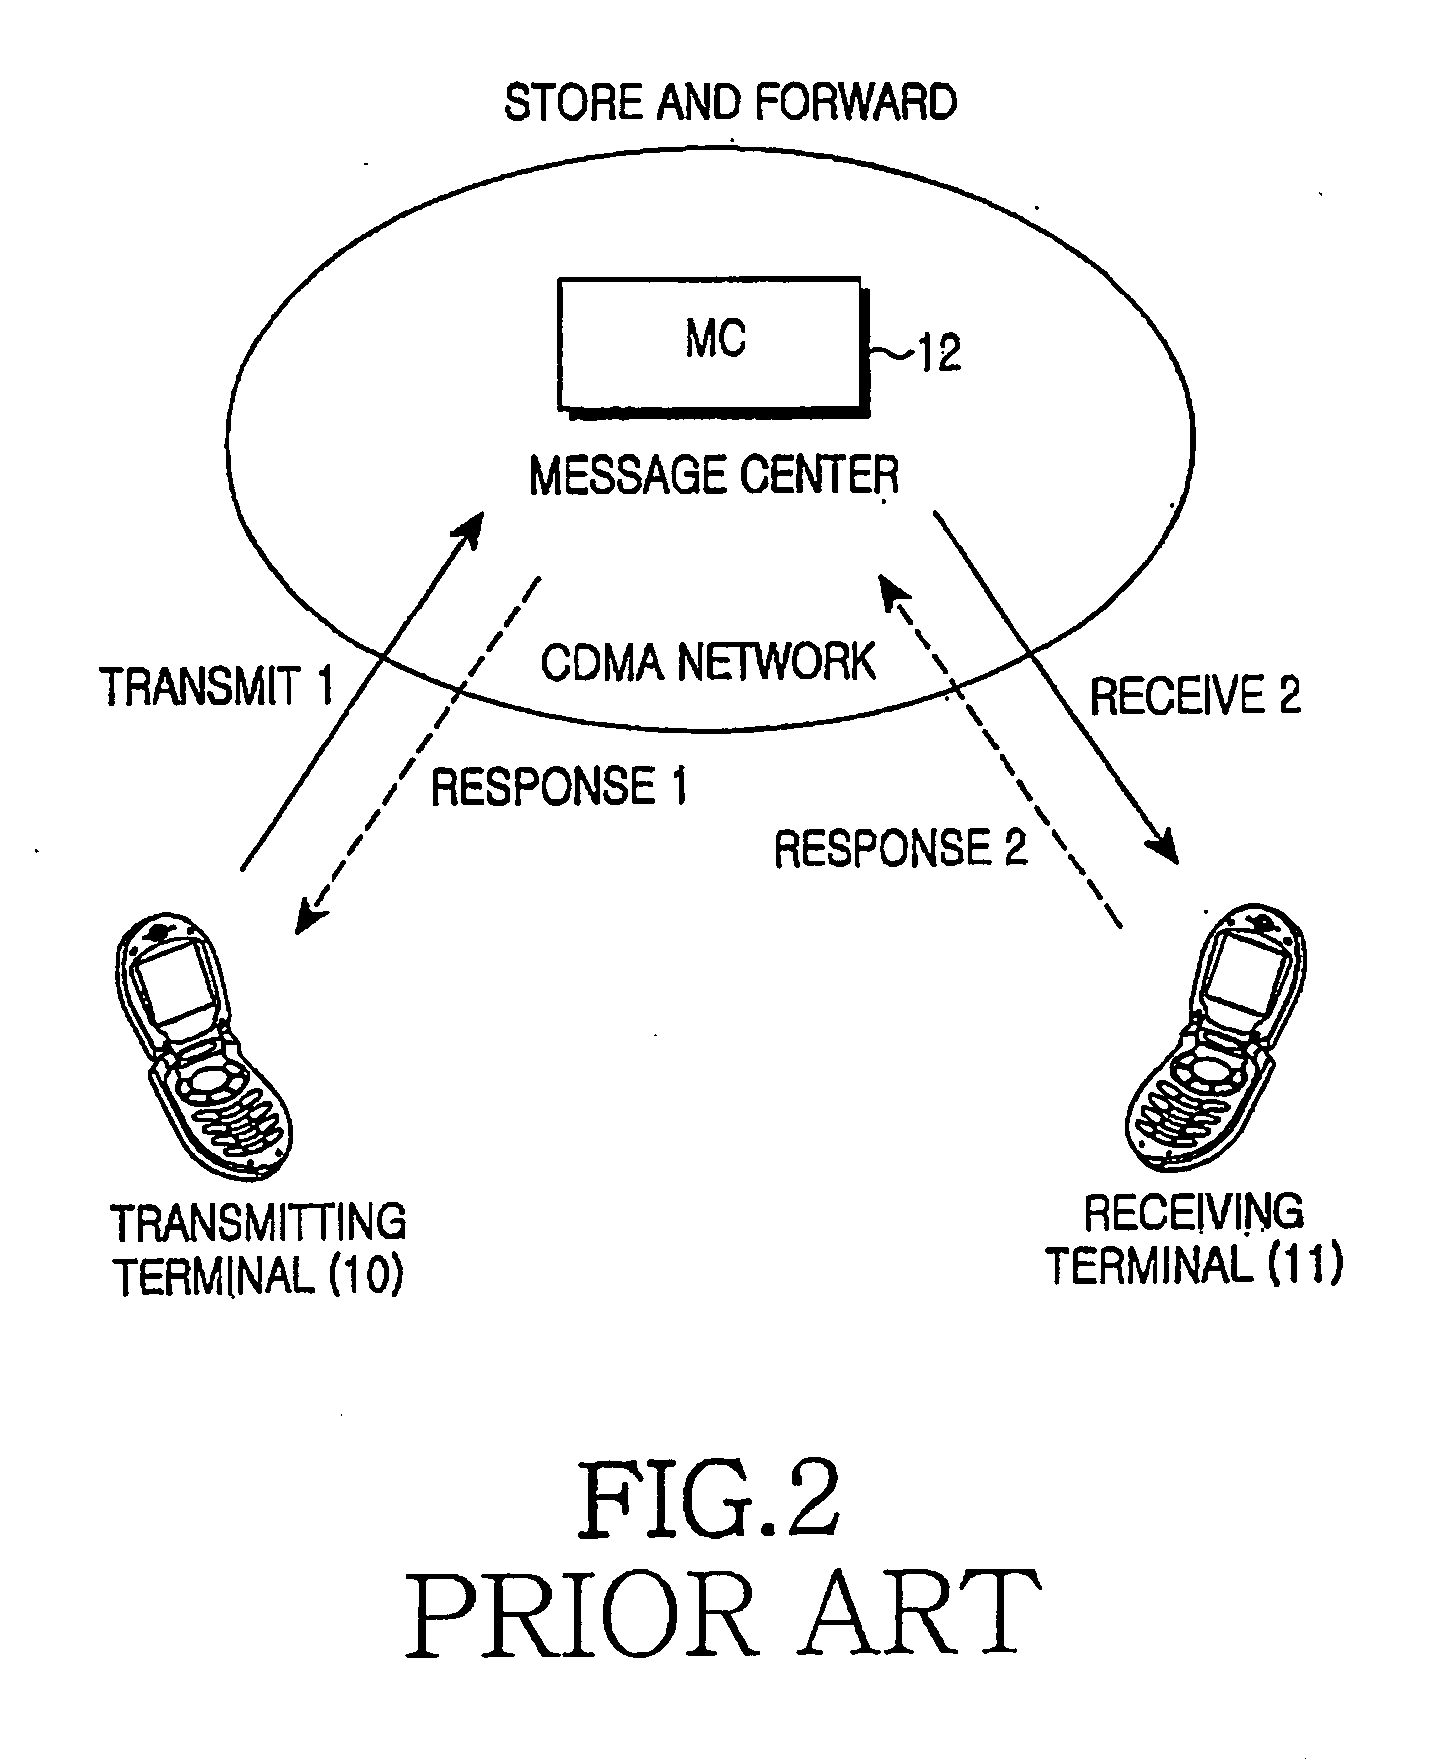 Apparatus and method for canceling SMS message transmission and retaining received SMS message